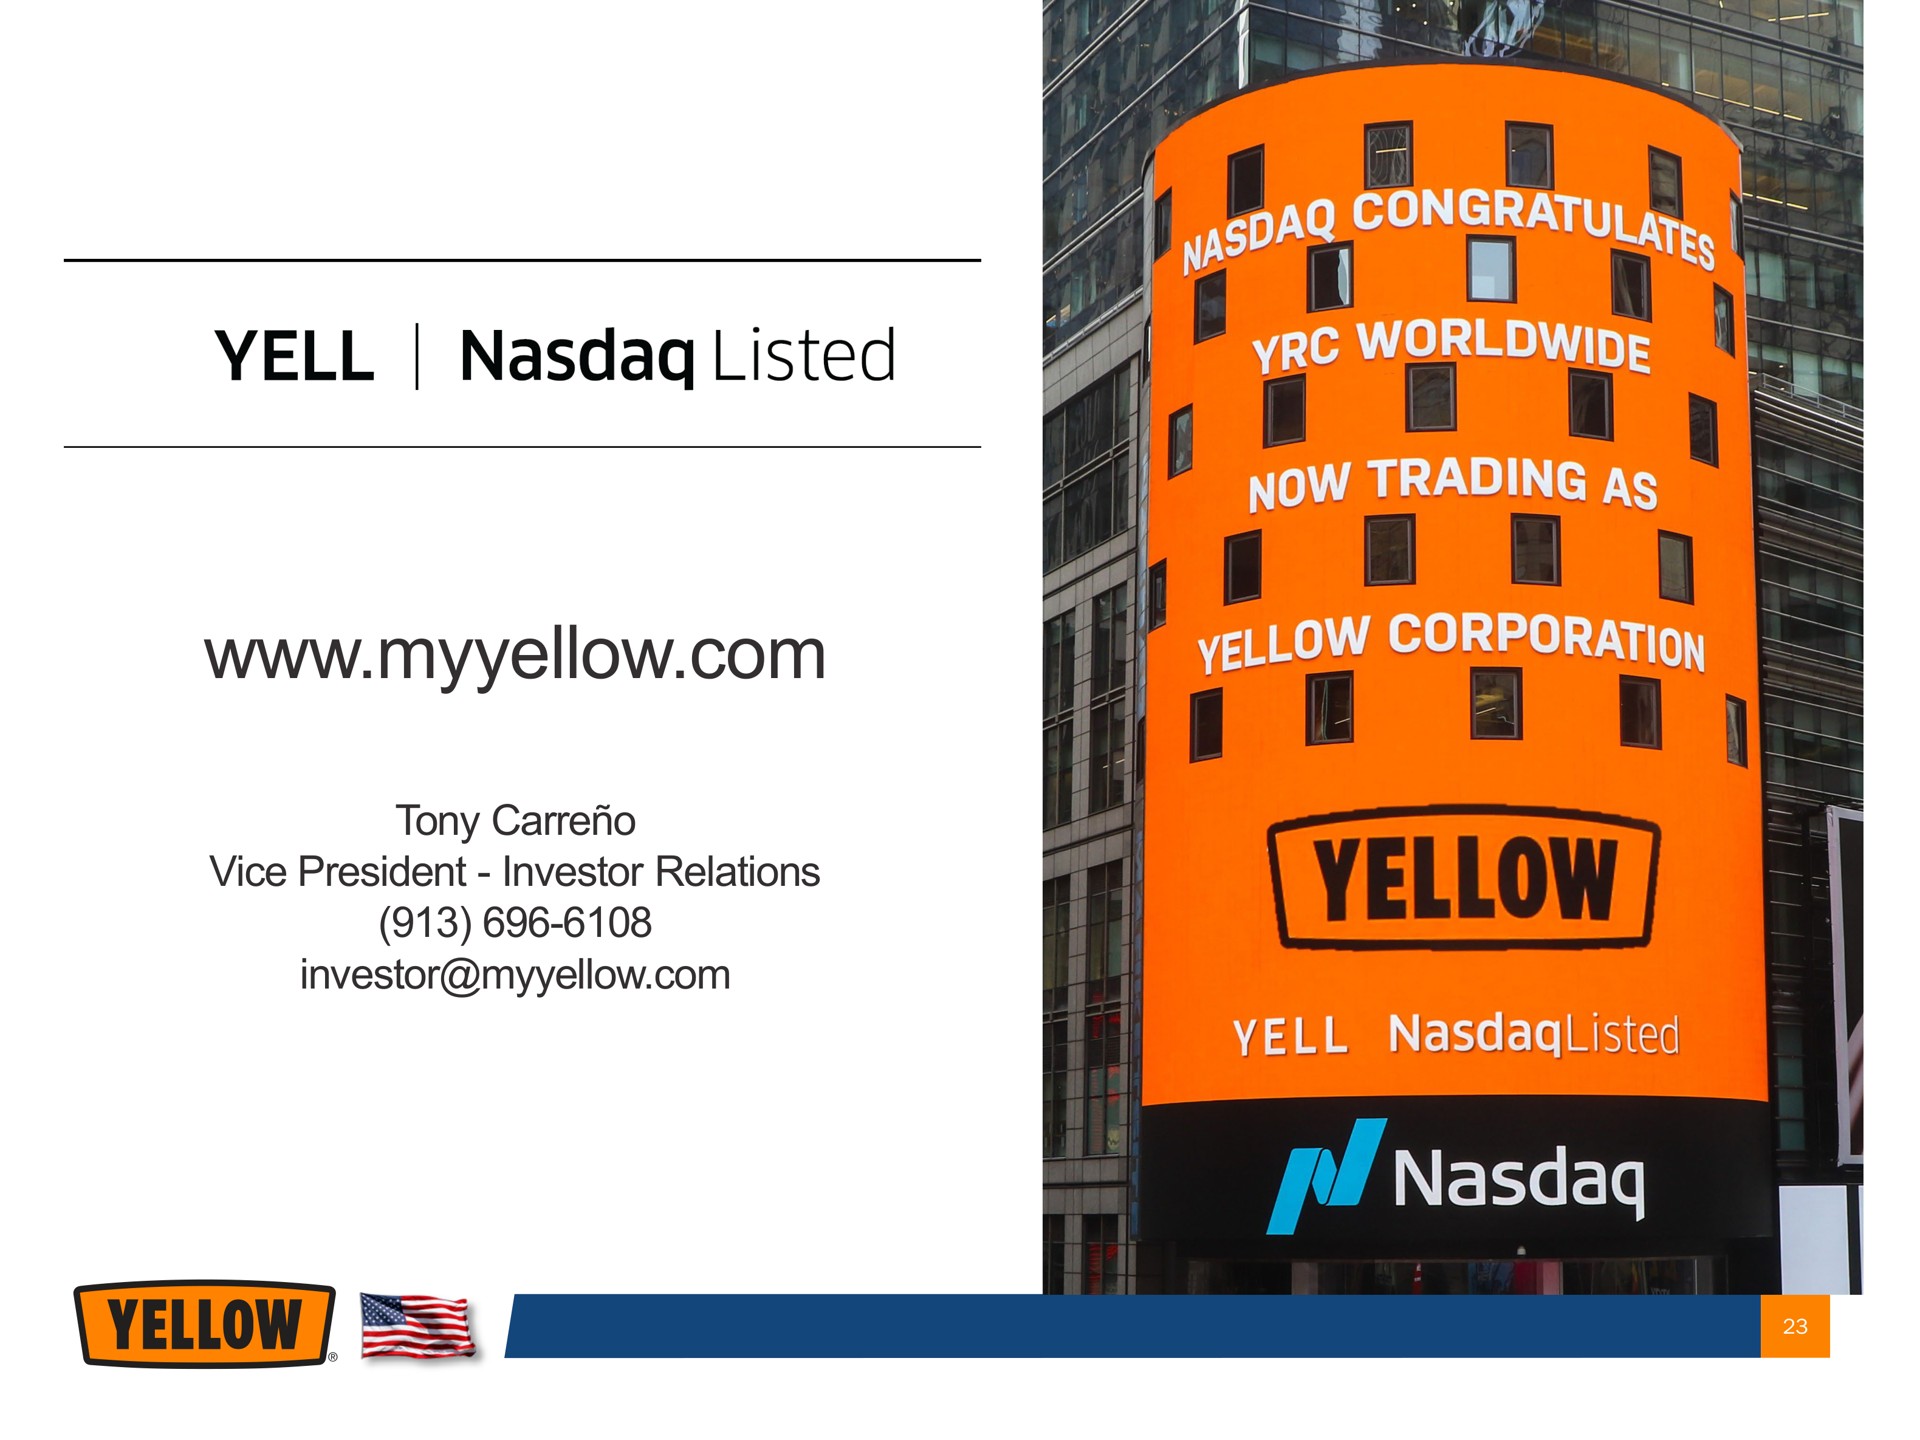 vell listed yellow now trading vell | Yellow Corporation